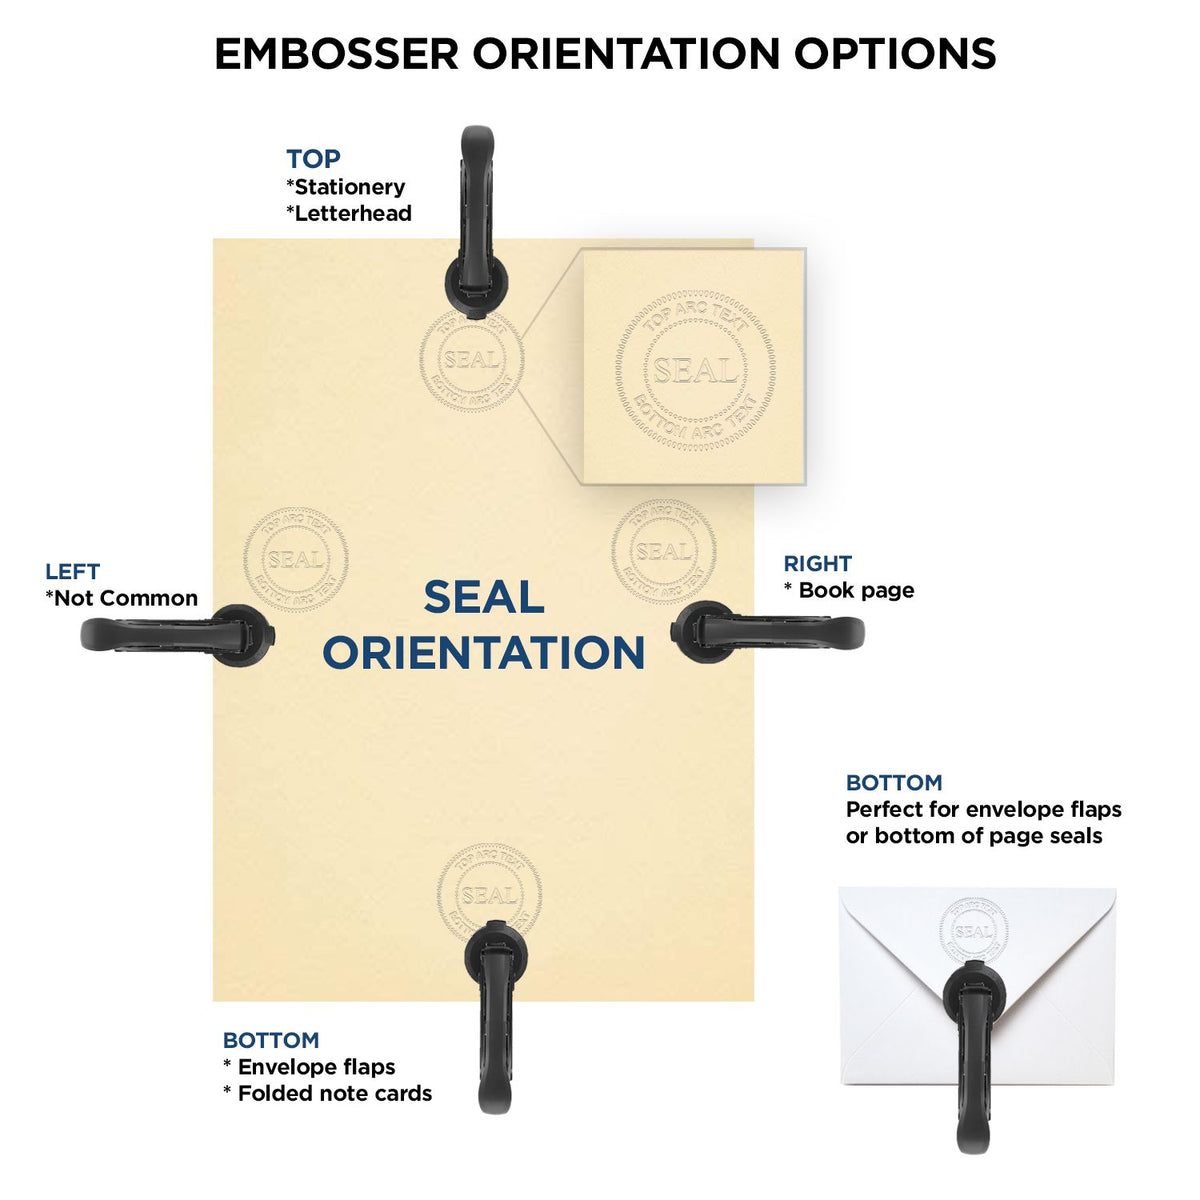 An infographic for the Guam Geologist Desk Seal showing embosser orientation, this is showing examples of a top, bottom, right and left insert.